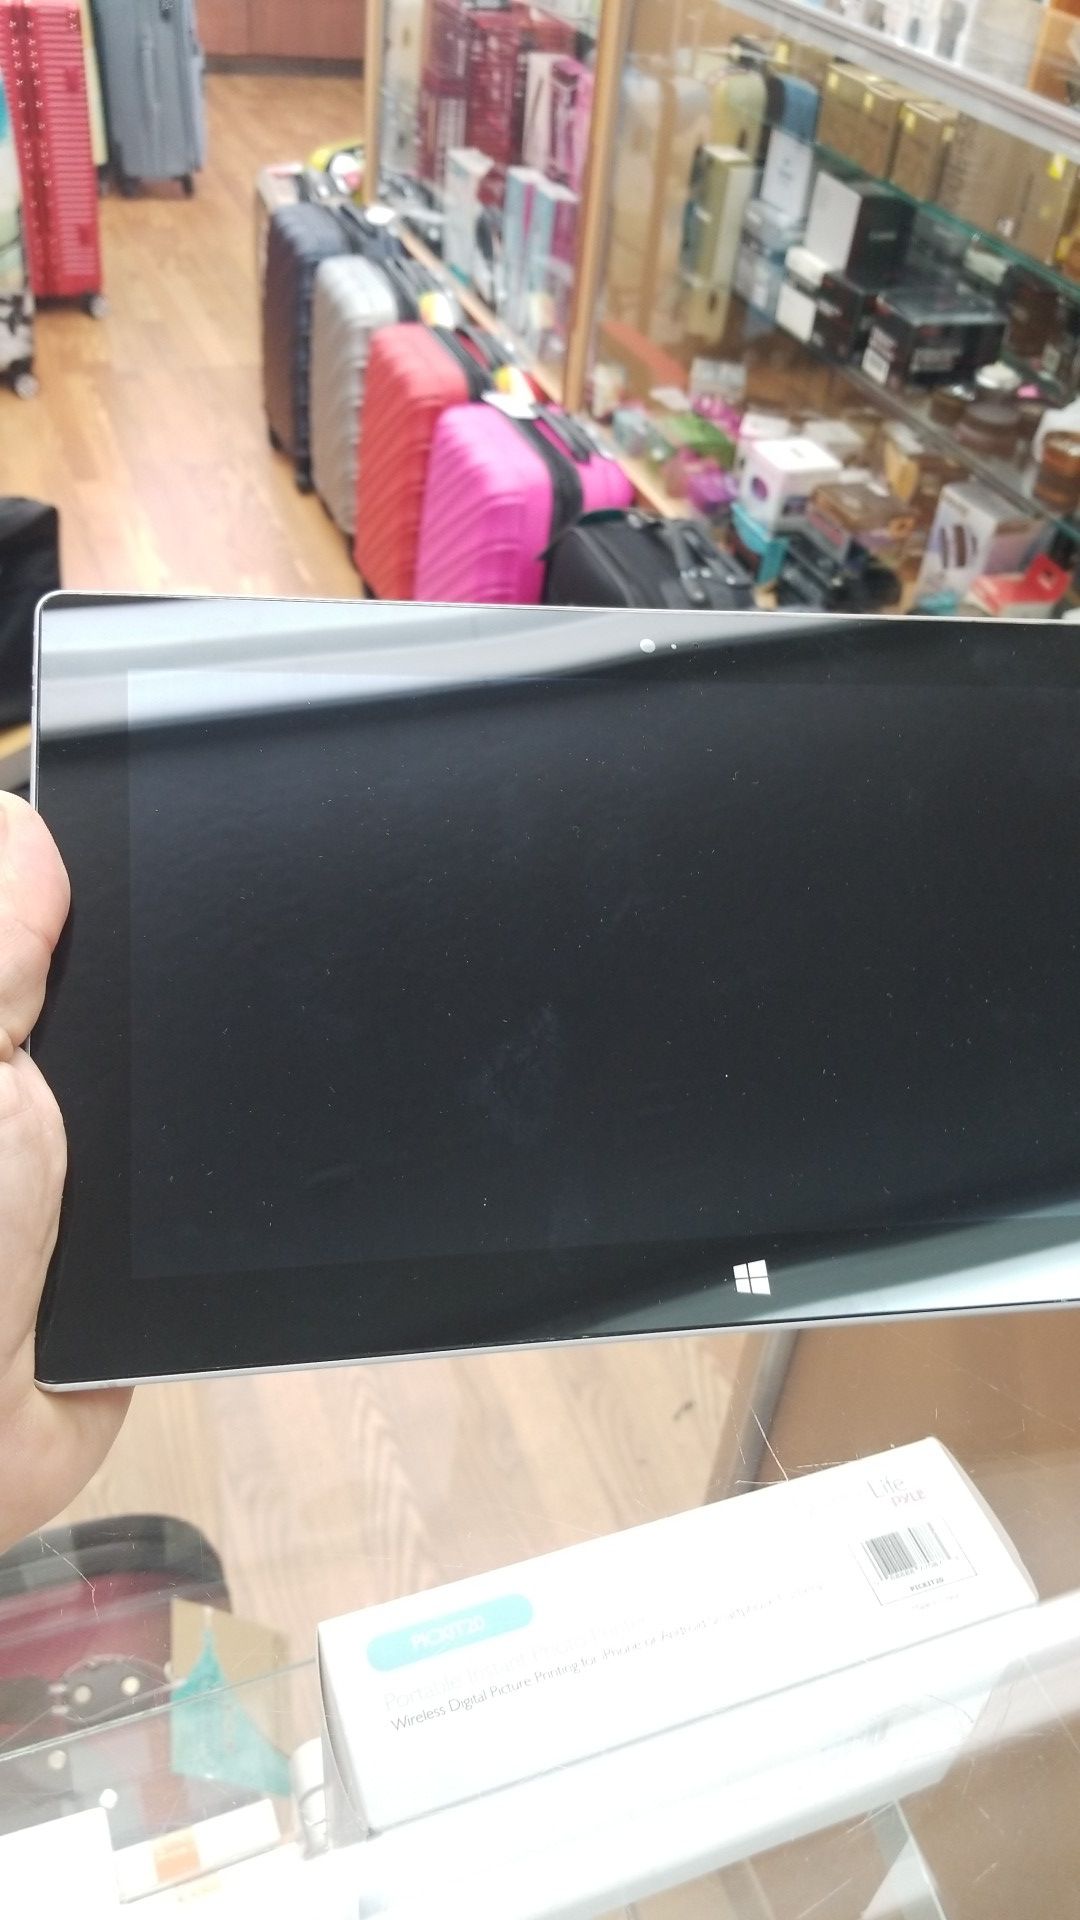 MICROSOFT SURFACE 2 RB 64GB FOR SALE!!!!